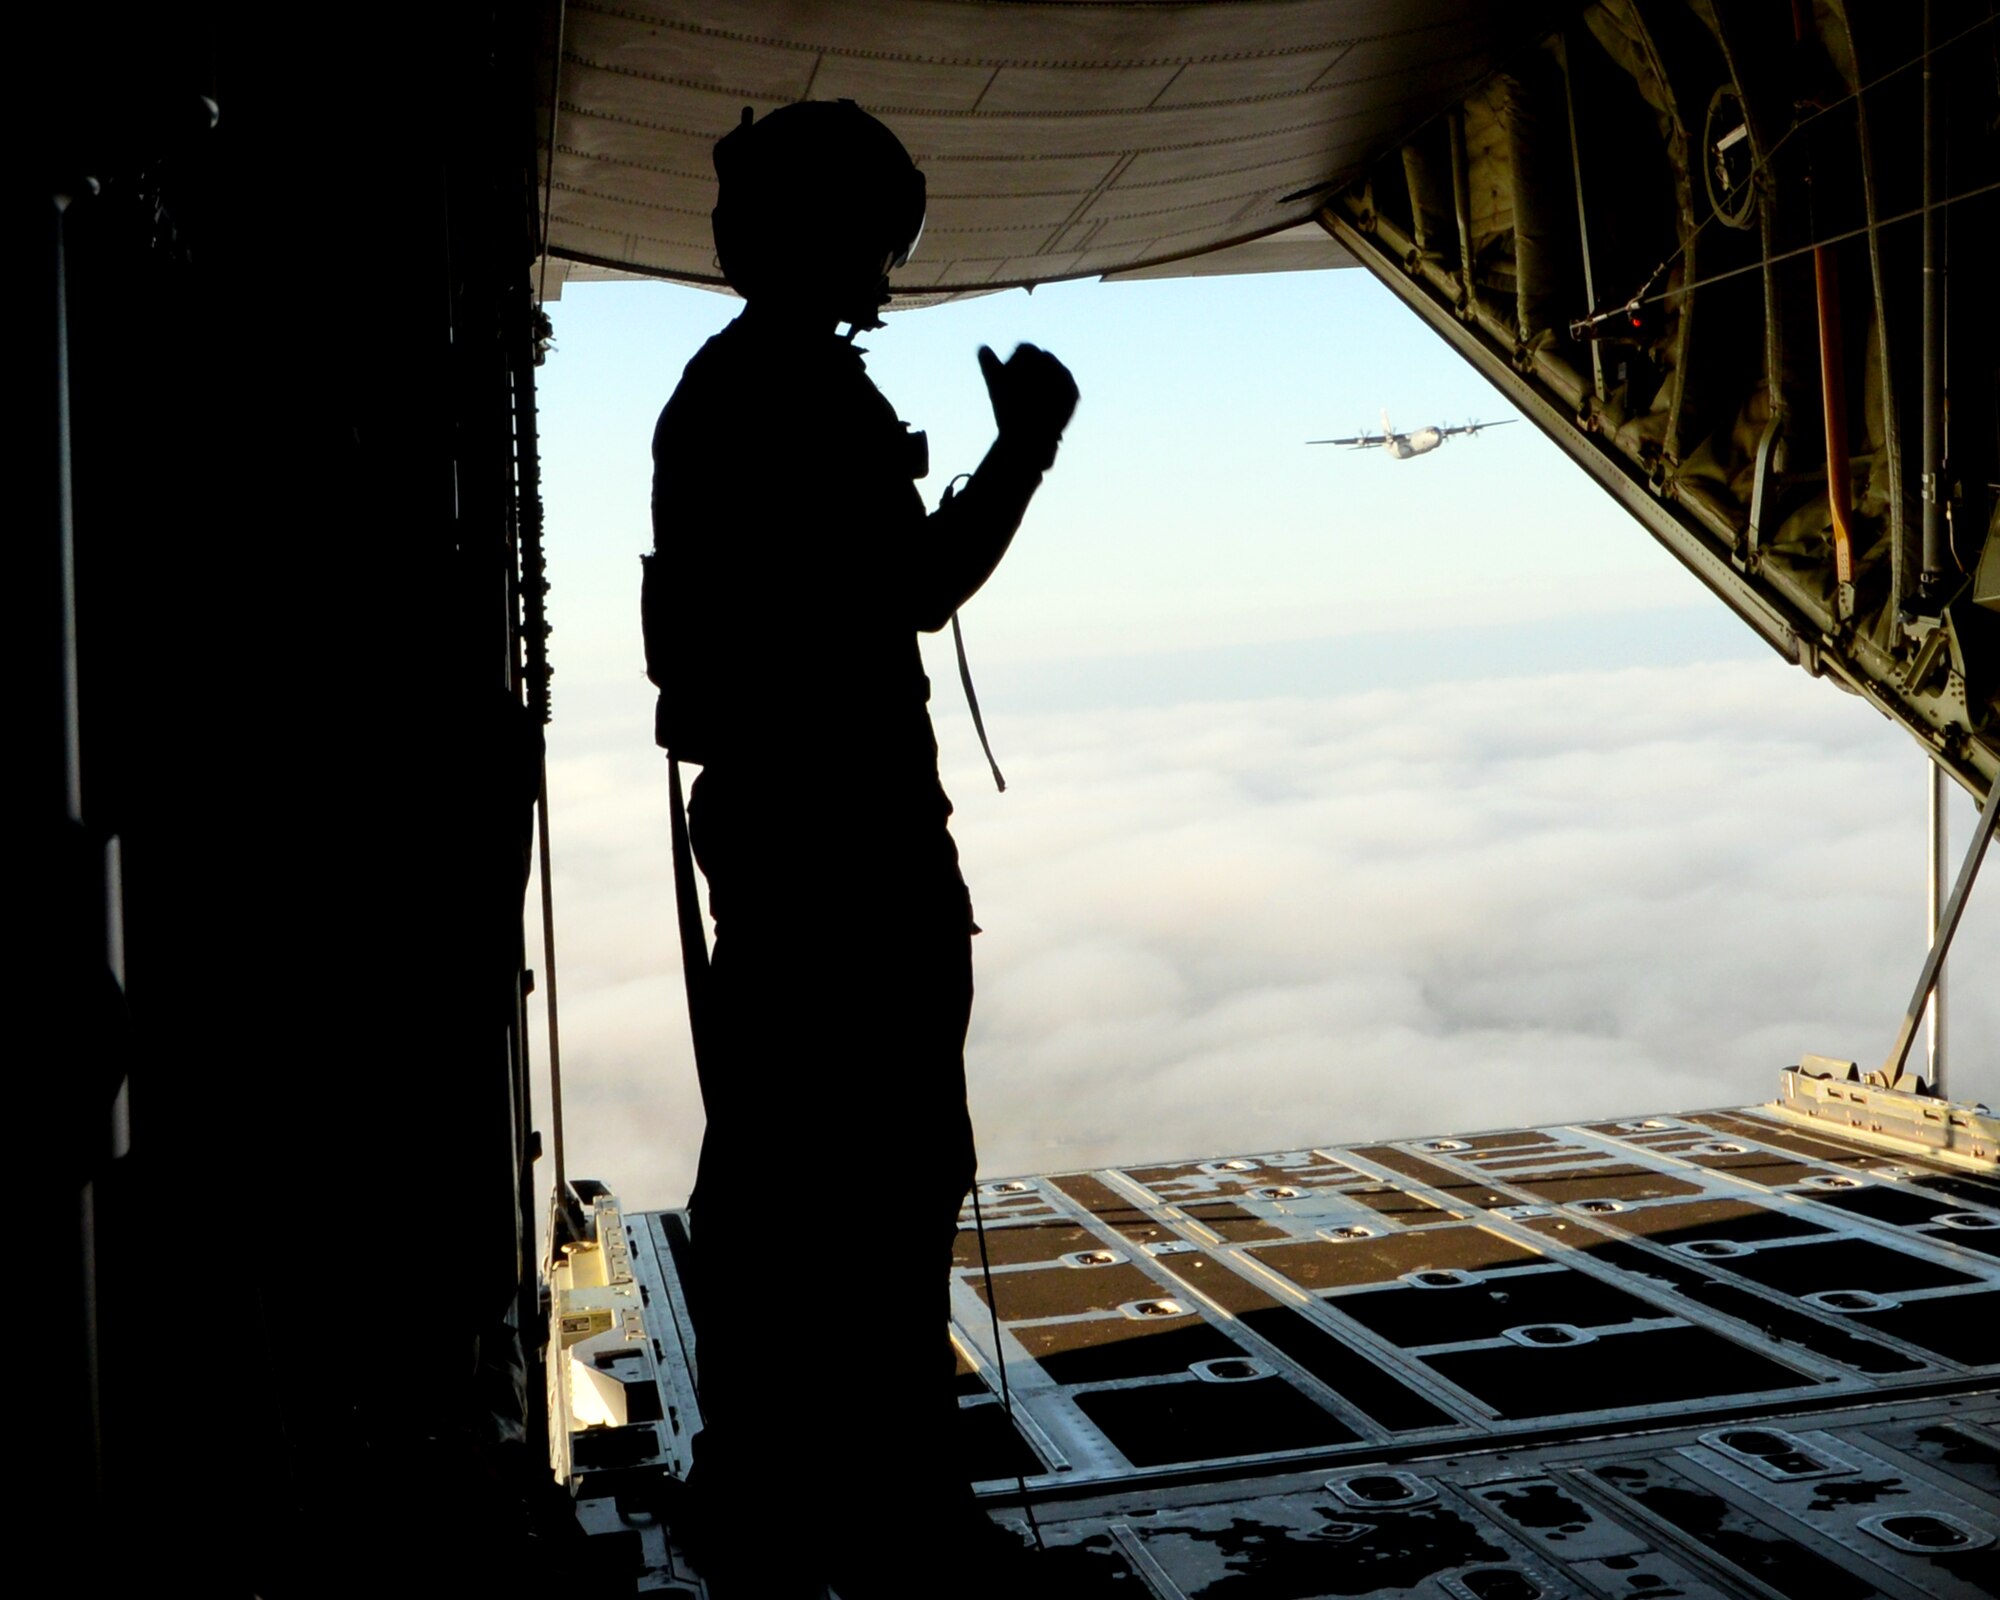 A 37th Airlfit Squadron loadmaster give the "okay" for parajumpers to begin their jump out of the C-130J Super Hercules over Chievres Air Base, Oct. 4, 2018. Two C-130s from the 37th AS executed the mission which were controlled by the 435th CRS in support of the NATO mission exercises. (U.S. Air Force photo by Airman 1st Class Ariel Leighty)